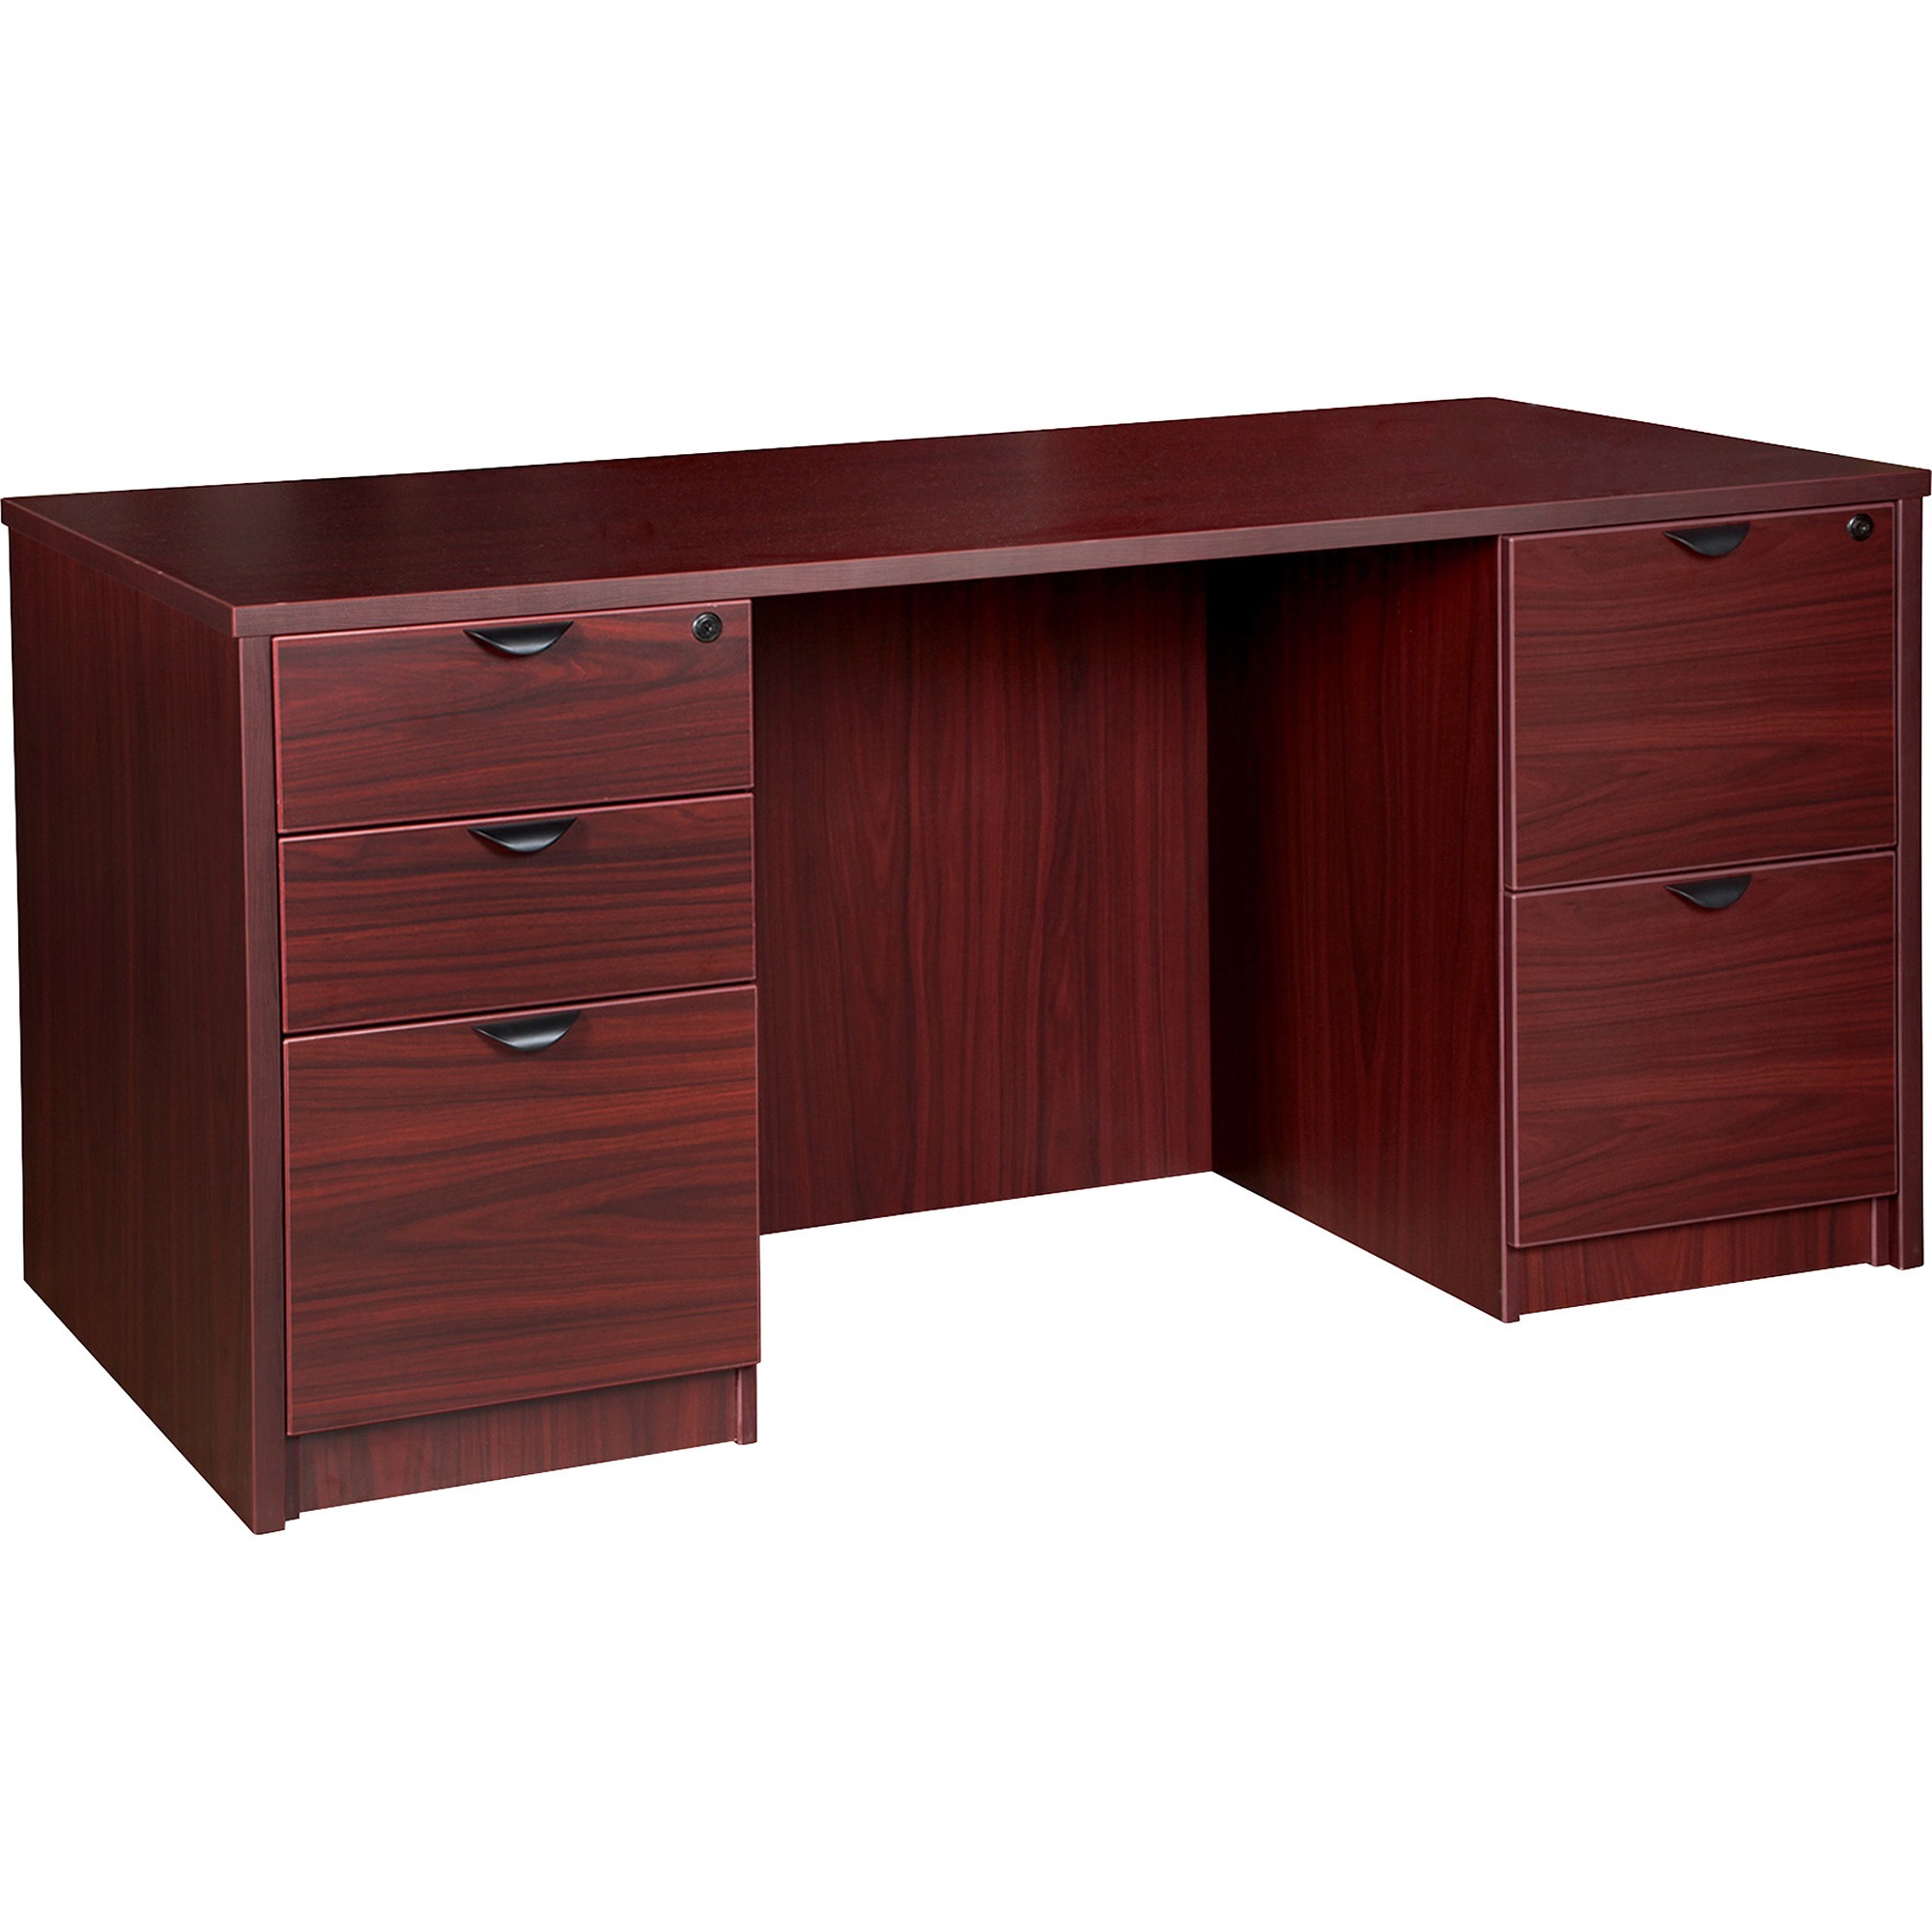 2.0 LLR | Laminate Furniture Double-Pedestal Prominence Lorell Lorell PD3066DPMY Desk Mahogany 5-Drawer - -